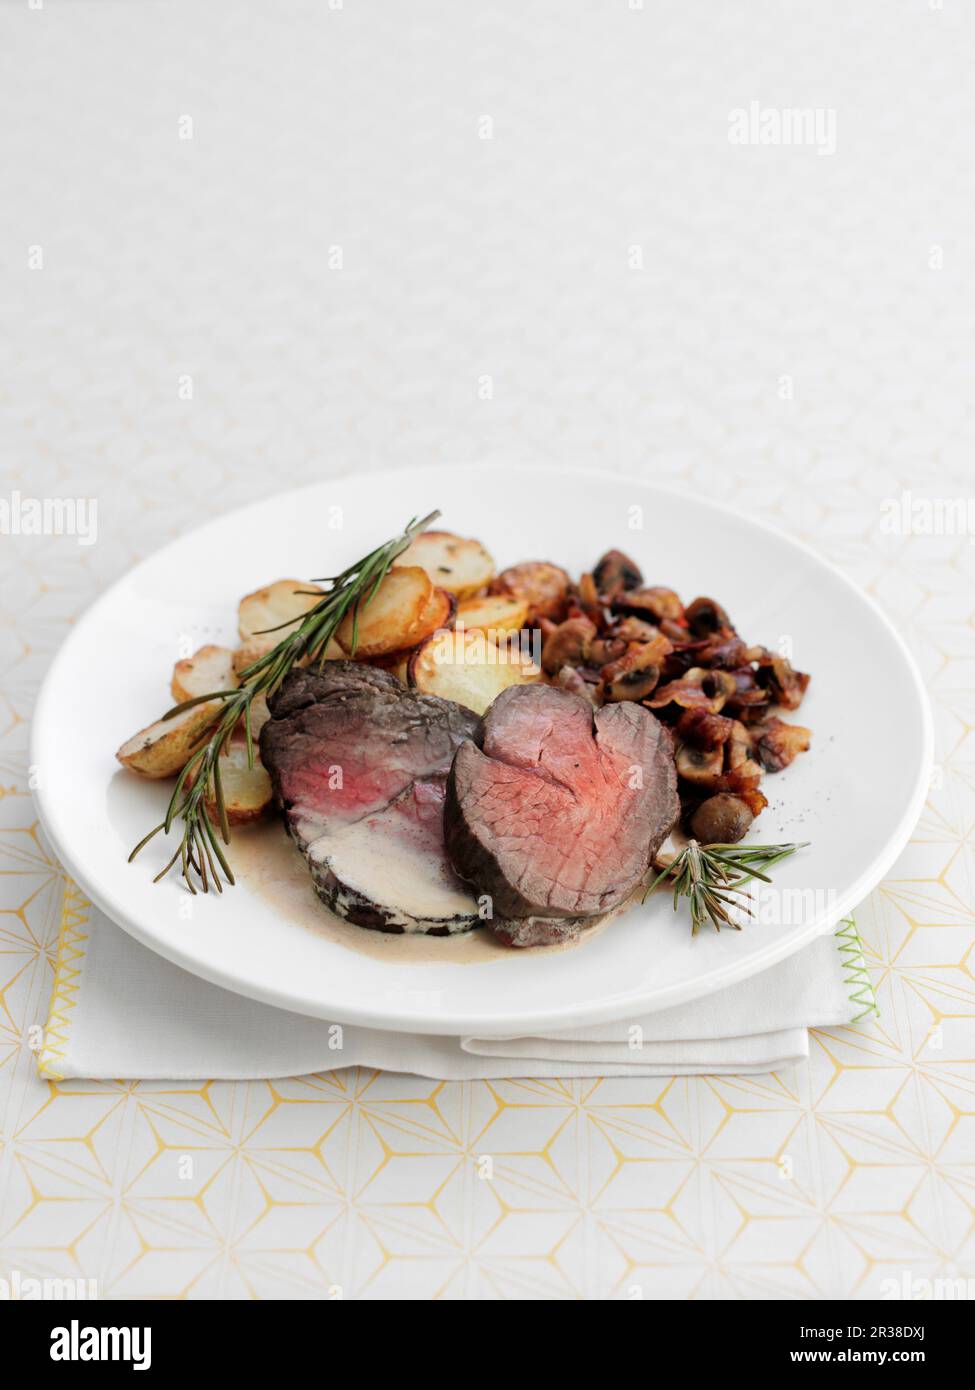 Beef fillets with fried potatoes and rosemary Stock Photo